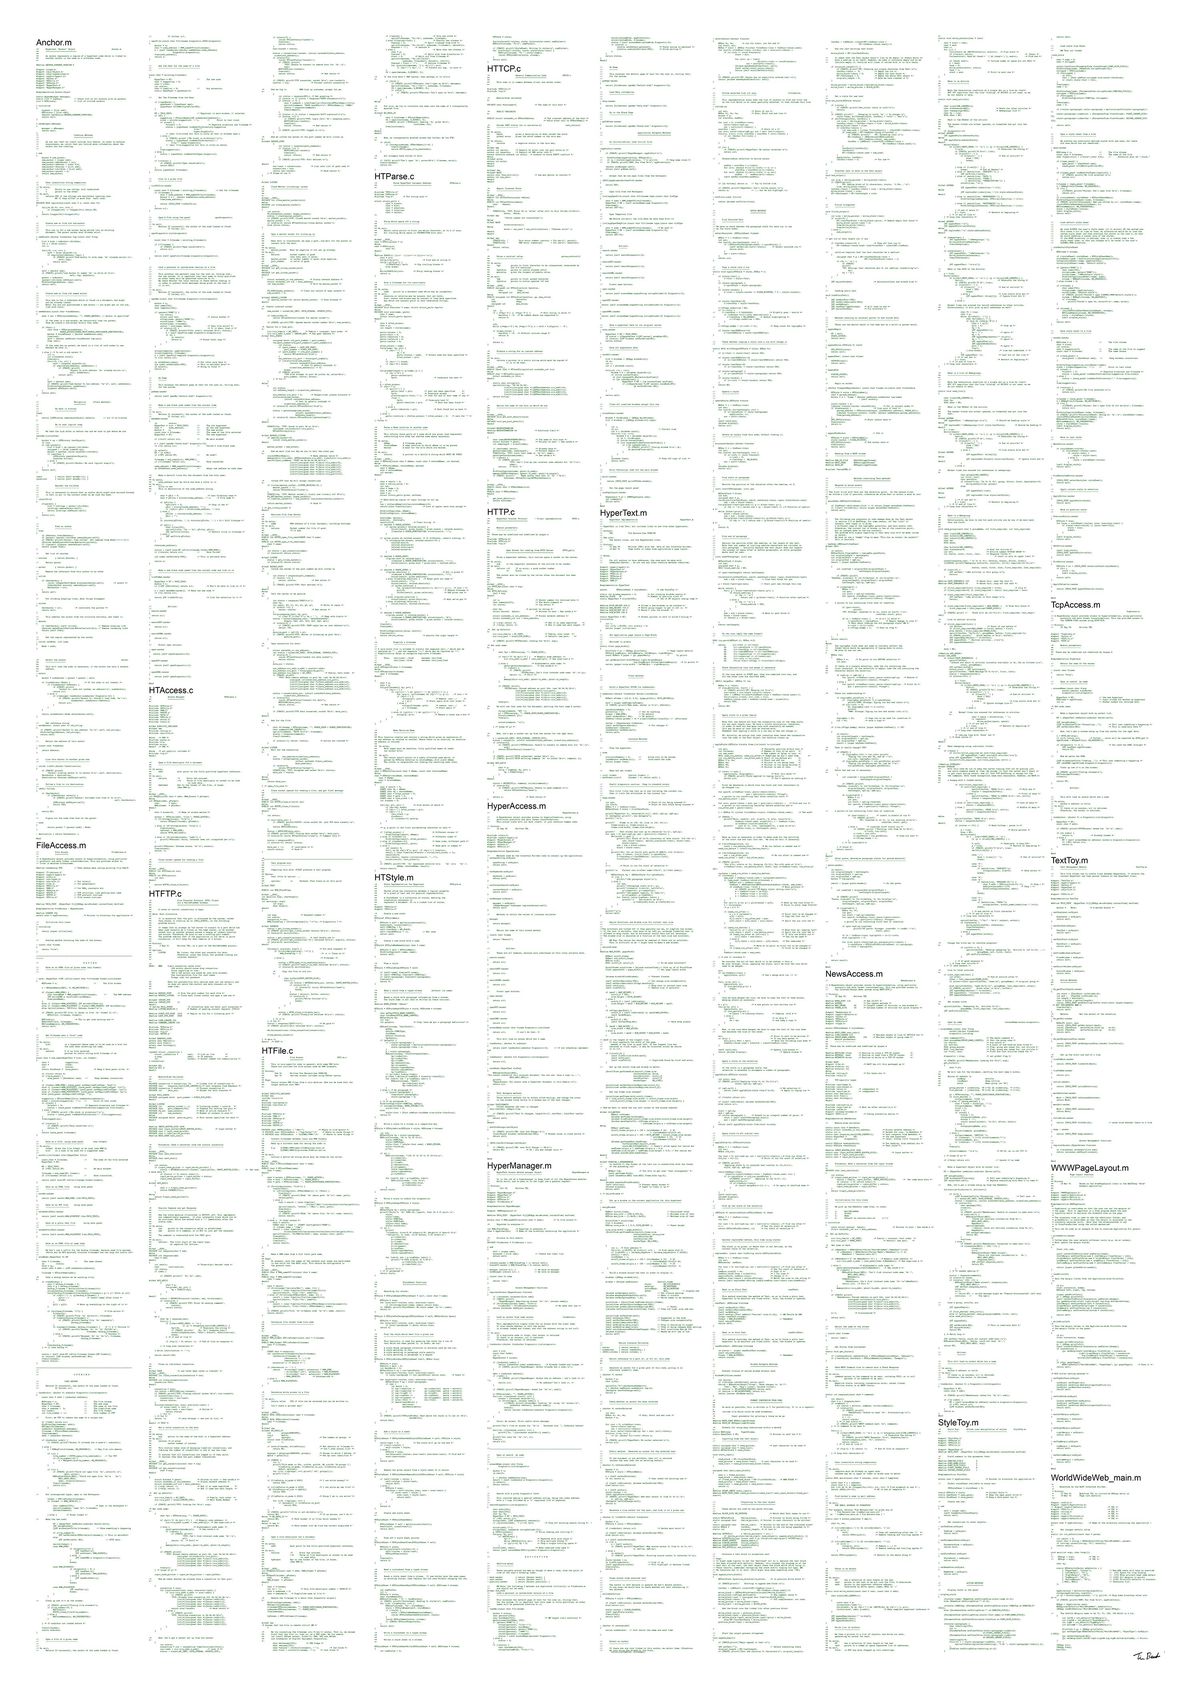 A poster of the lines of code that established the World Wide Web.